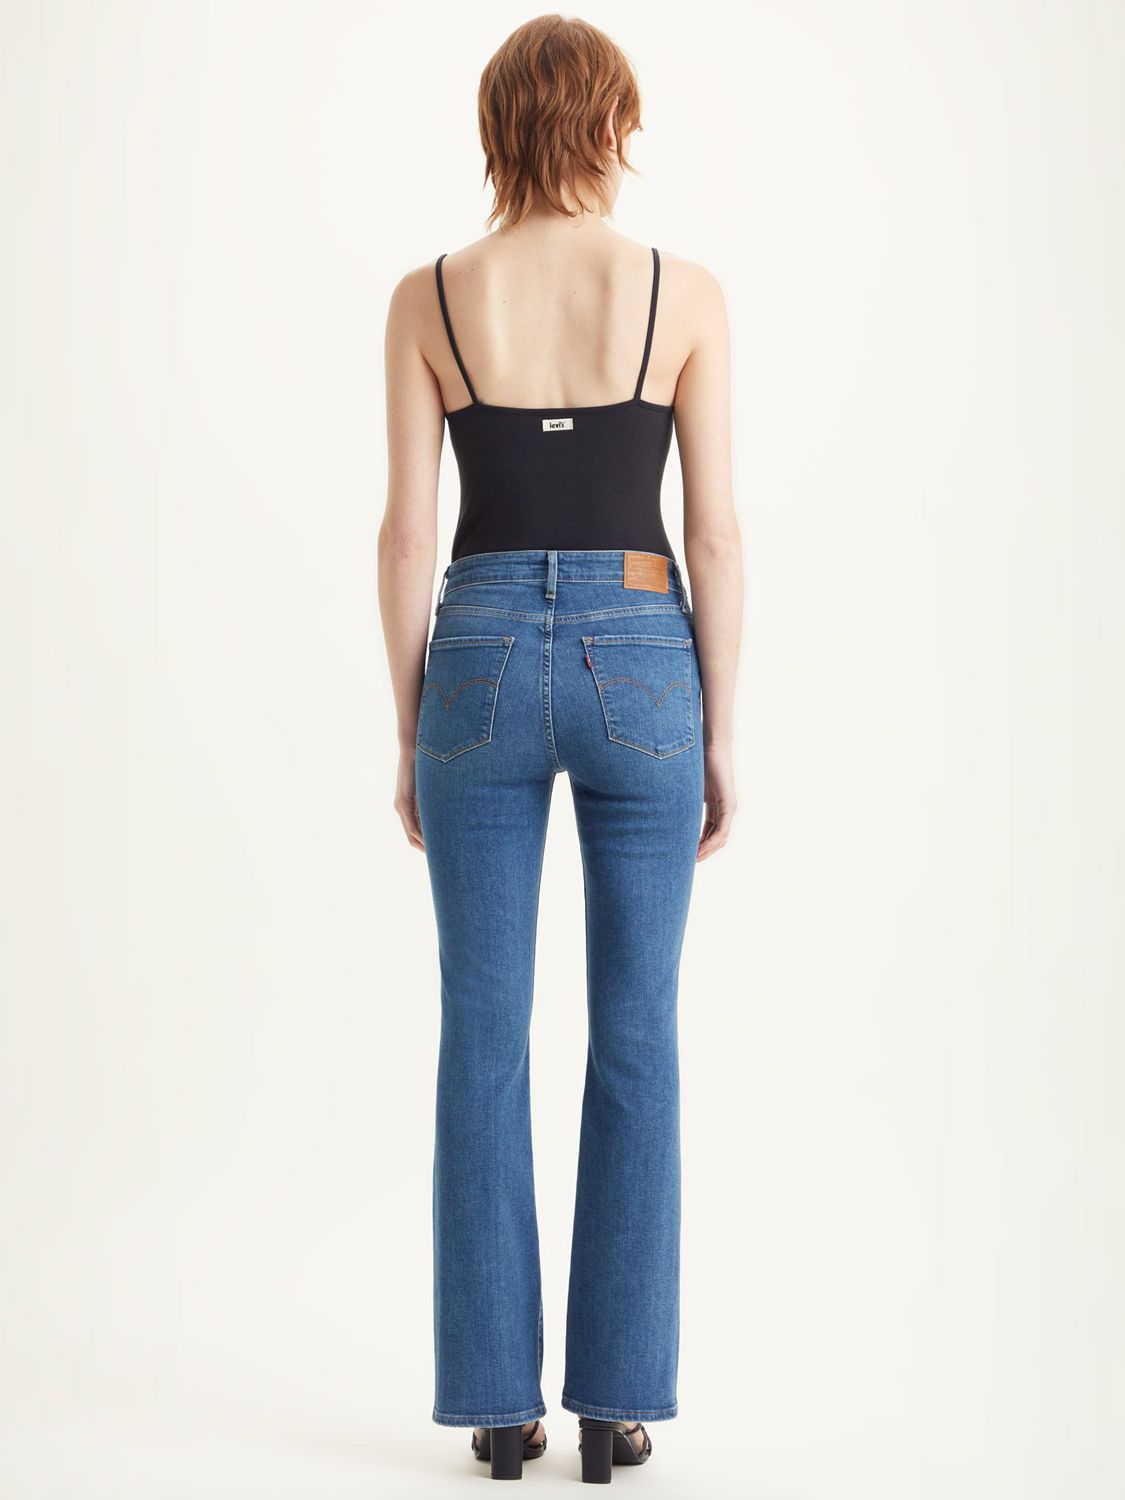 LEVI'S 725 High Rise Bootcut Jeans in Blow Your Mind